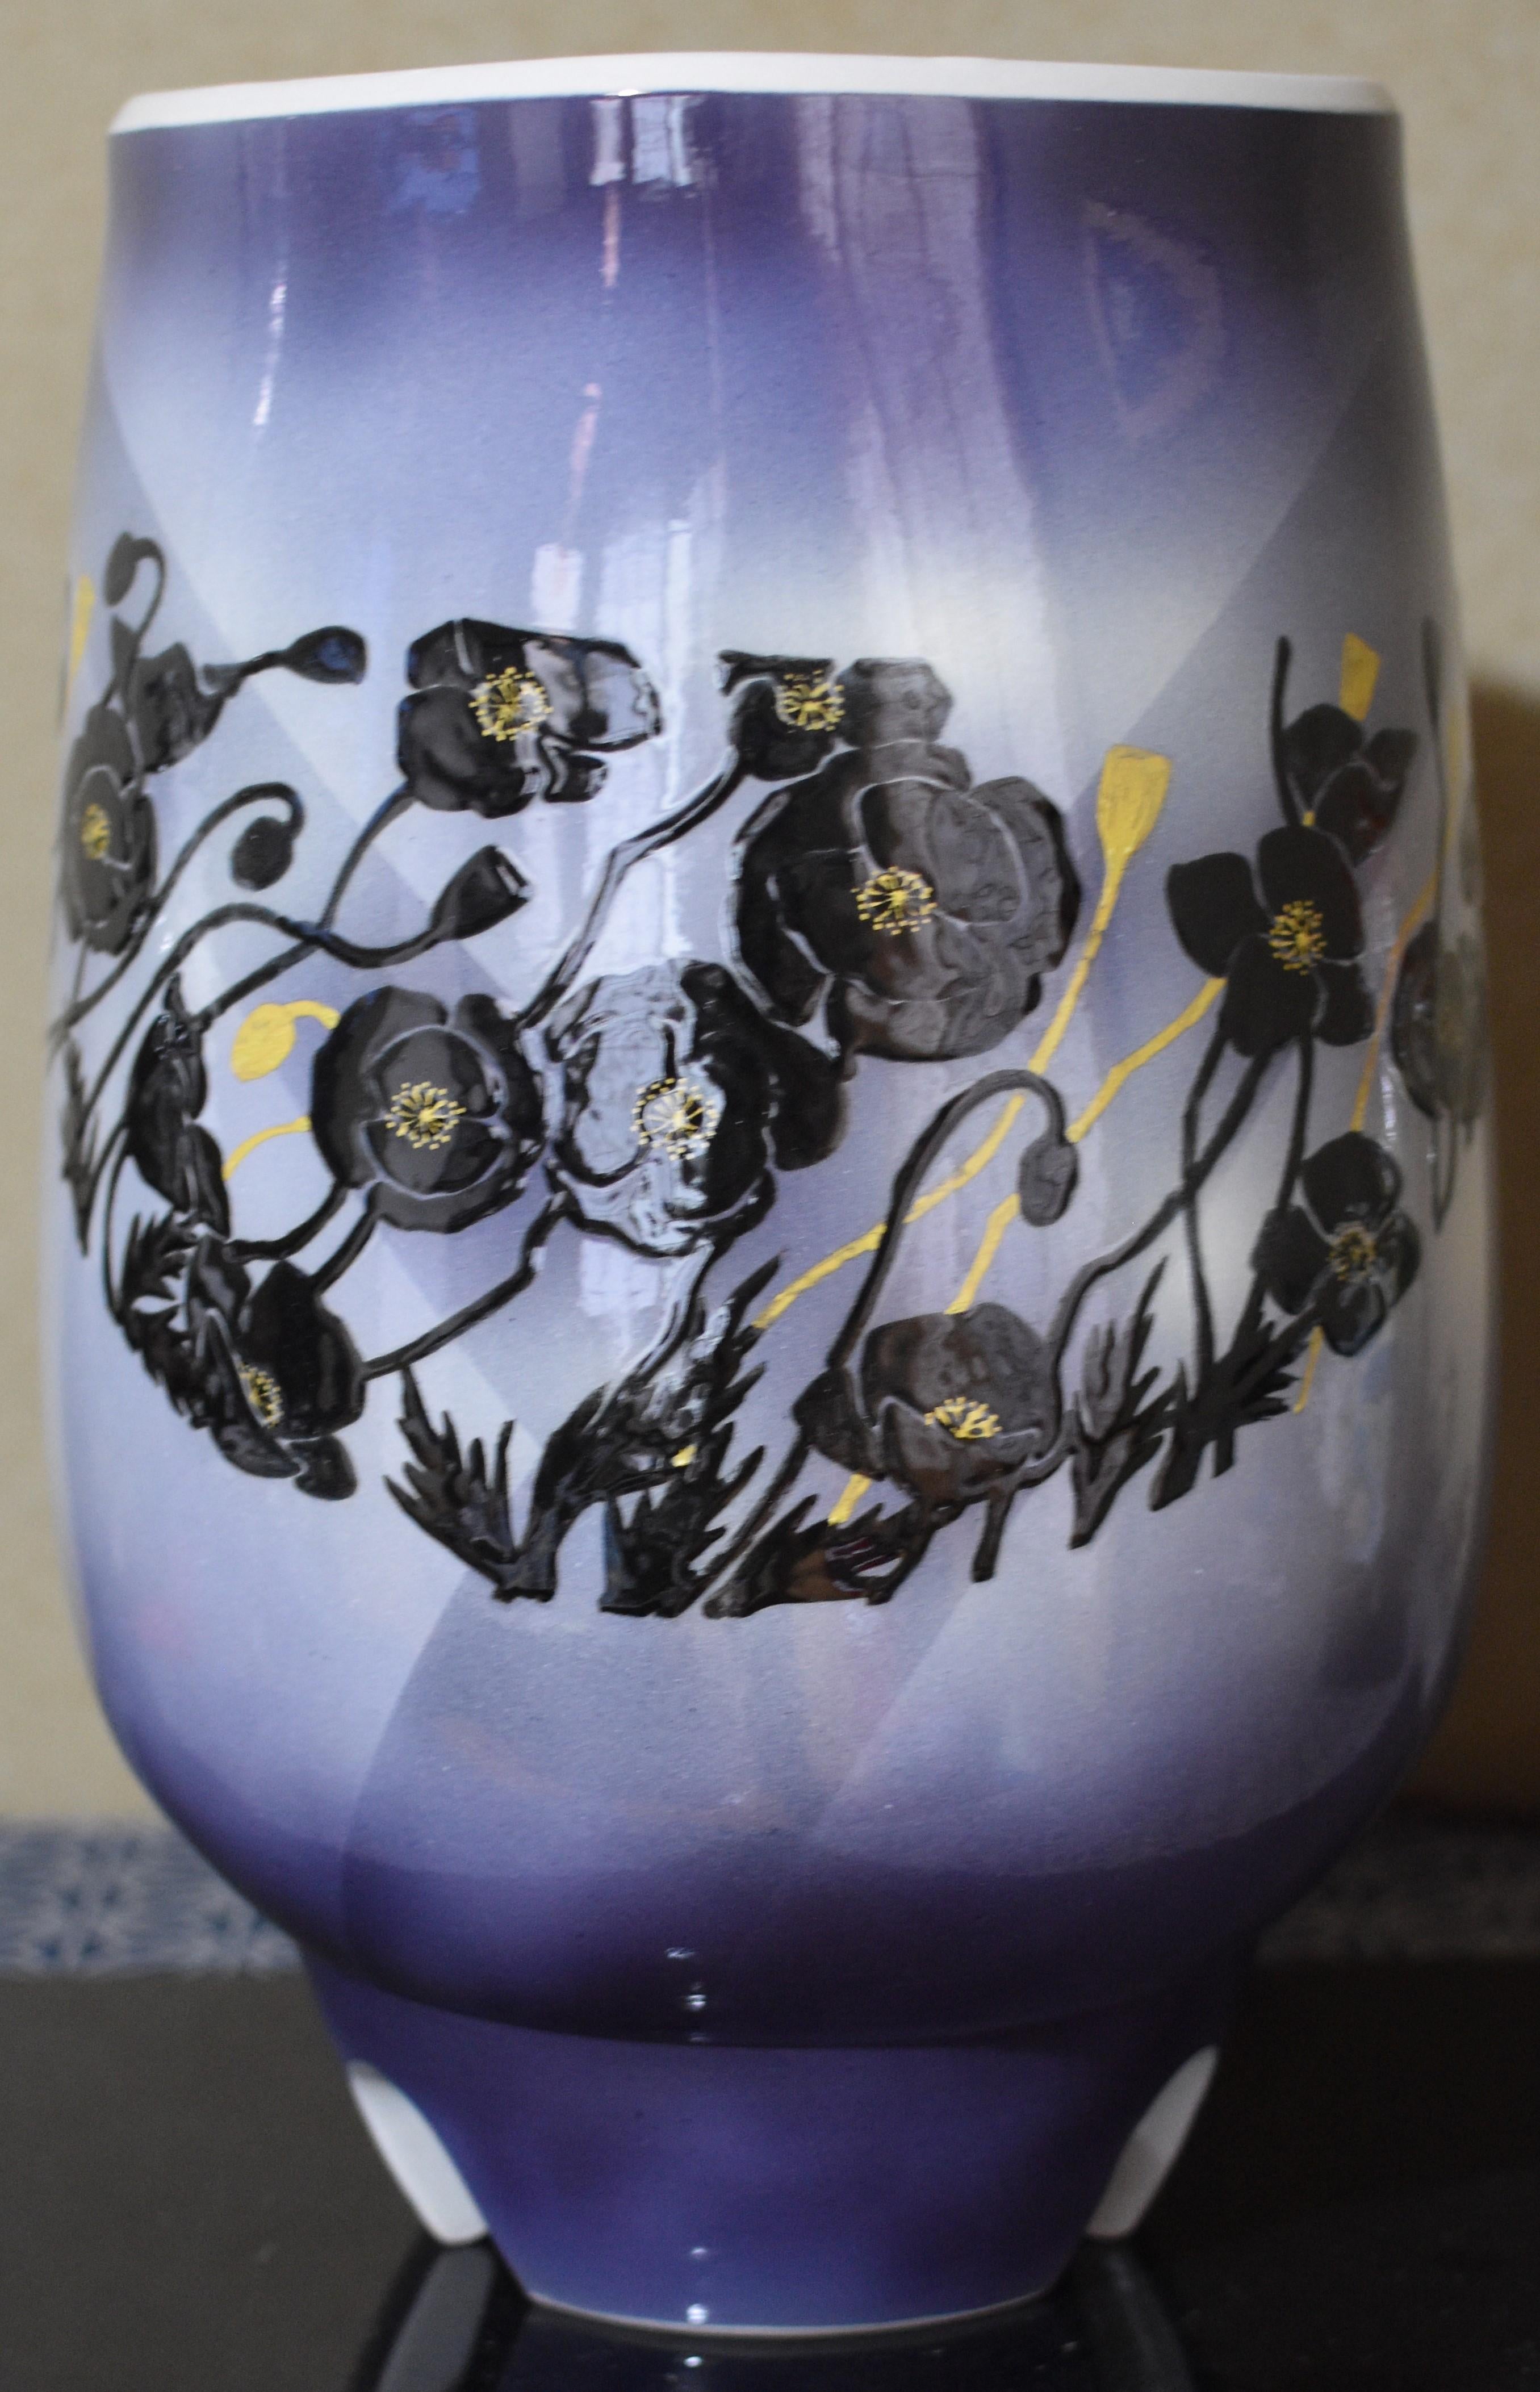 Exceptional contemporary Japanese decorative legged porcelain vase of extraordinary quality, intricately hand painted in black, set against beautiful shades of the artist's signature purple blue on a stunningly shaped porcelain body. It is a signed